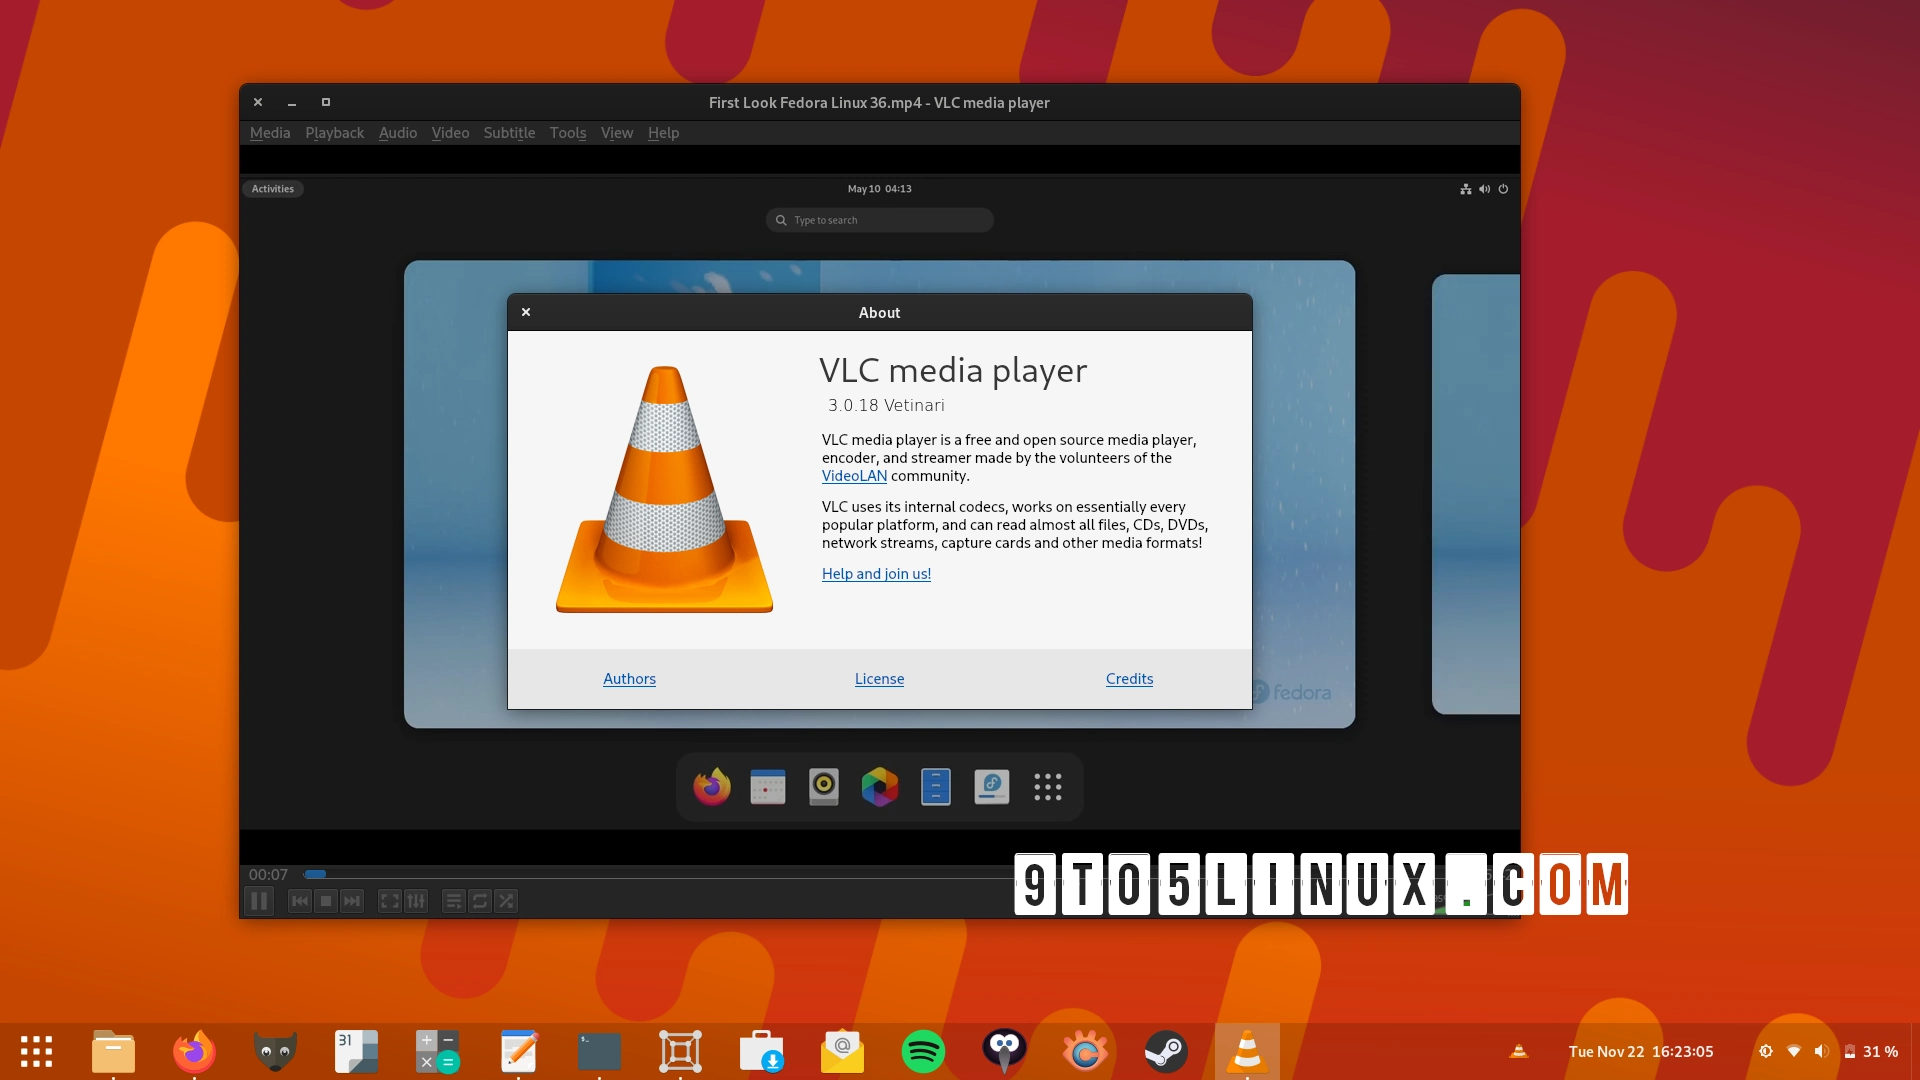 VLC 3.0.18 Is Out with RISC-V Support, DVBSub Support Inside MKV, SMBv2 Improvements